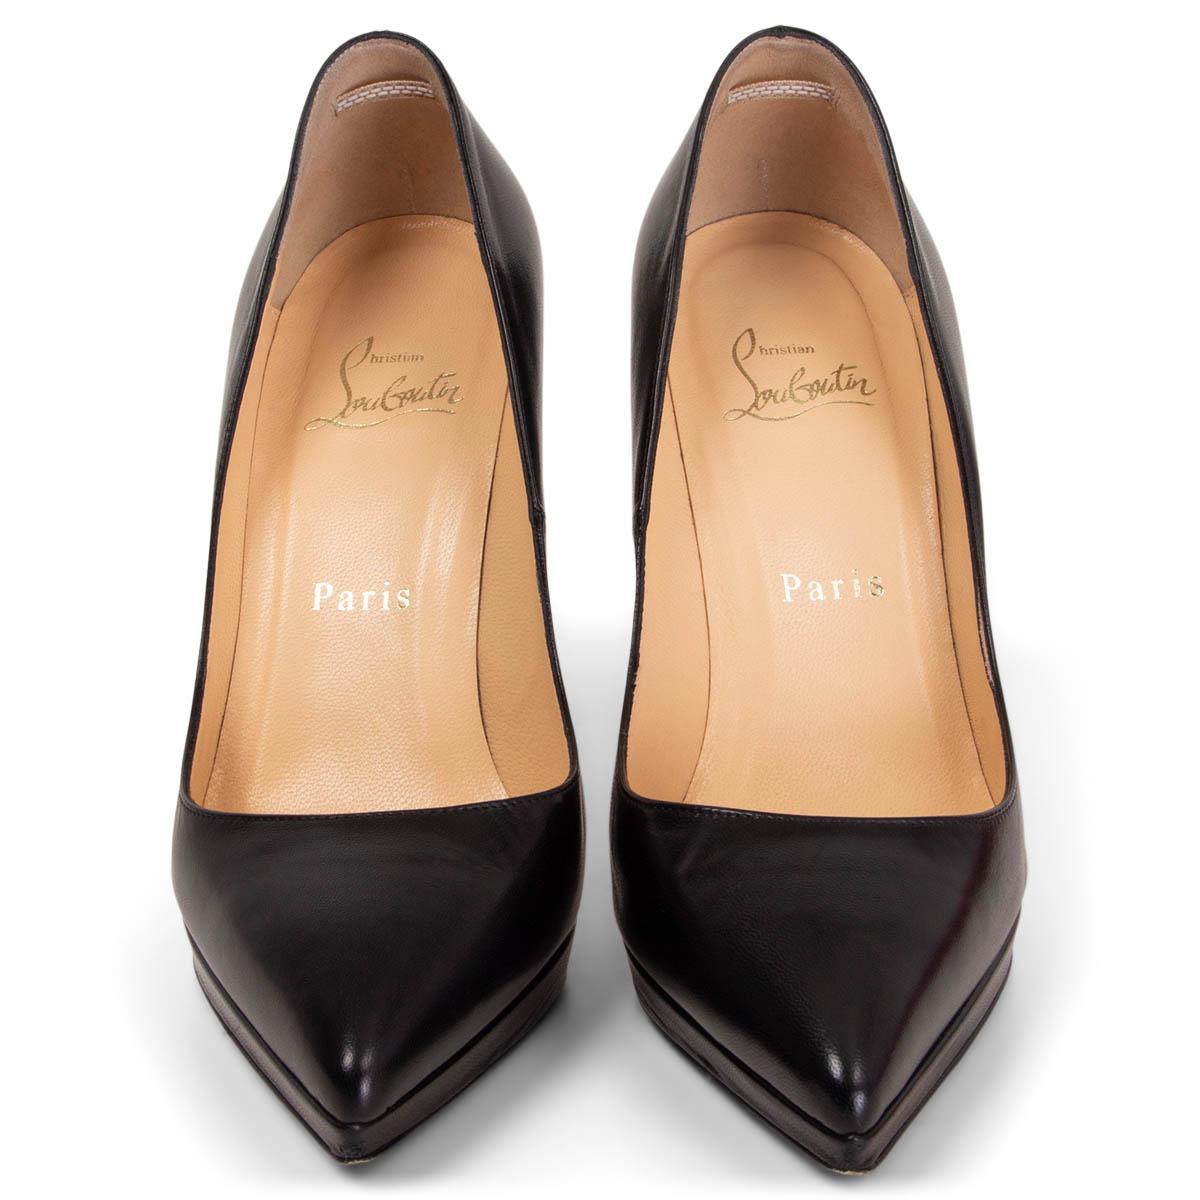 100% authentic Christian Louboutin Pigalle Plato 120 in black calfskin. Has been worn once or twice and is in excellent condition. Comes with dust bag. 

Measurements
Imprinted Size	36
Shoe Size	36
Inside Sole	23cm (9in)
Width	7cm (2.7in)
Heel	11cm